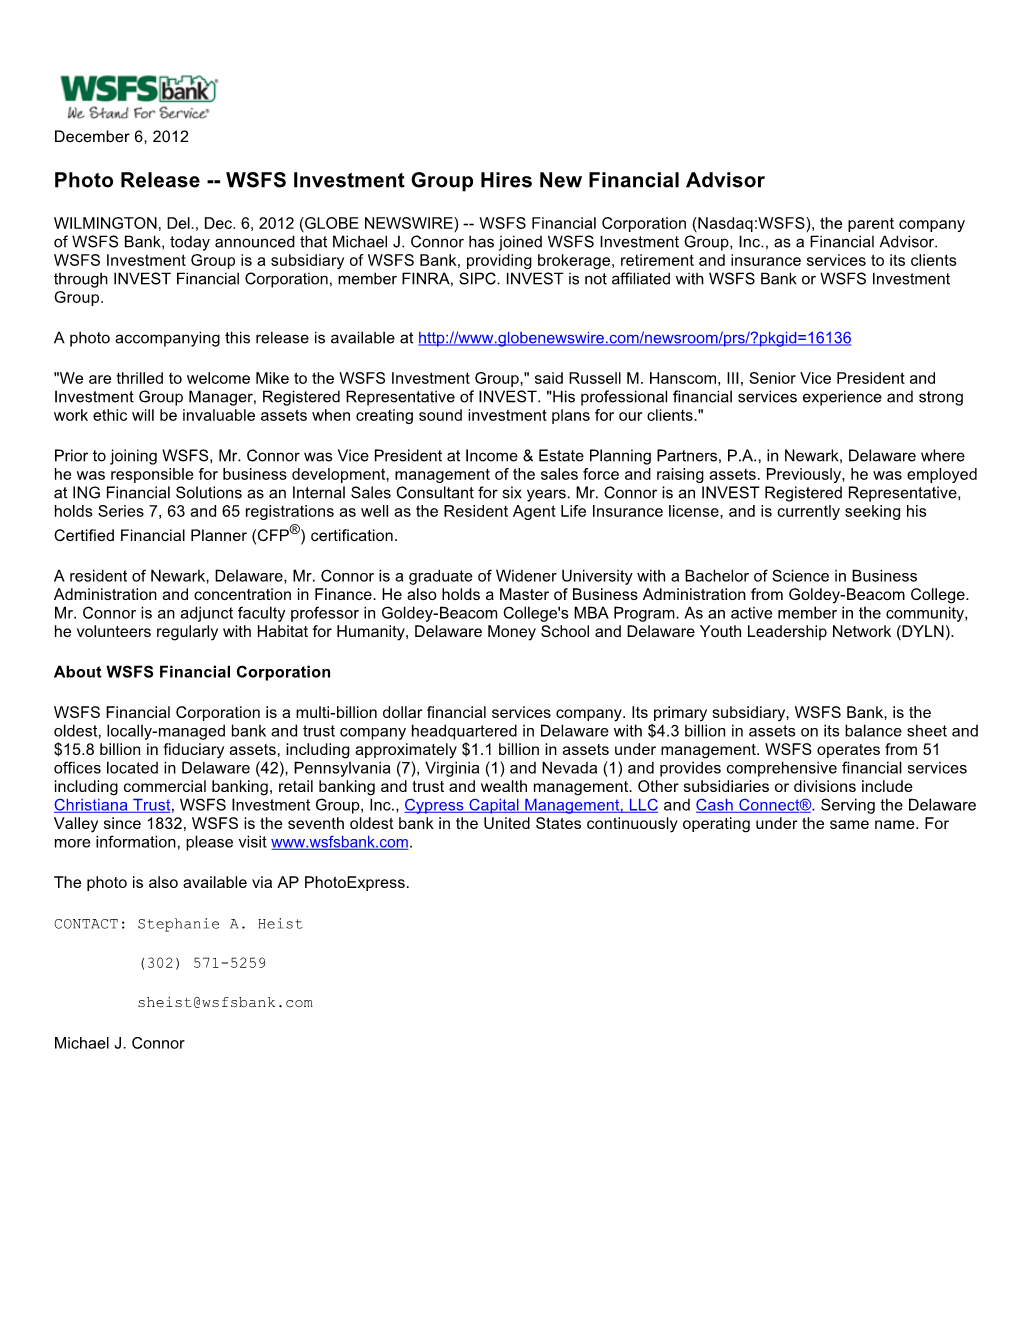 WSFS Investment Group Hires New Financial Advisor